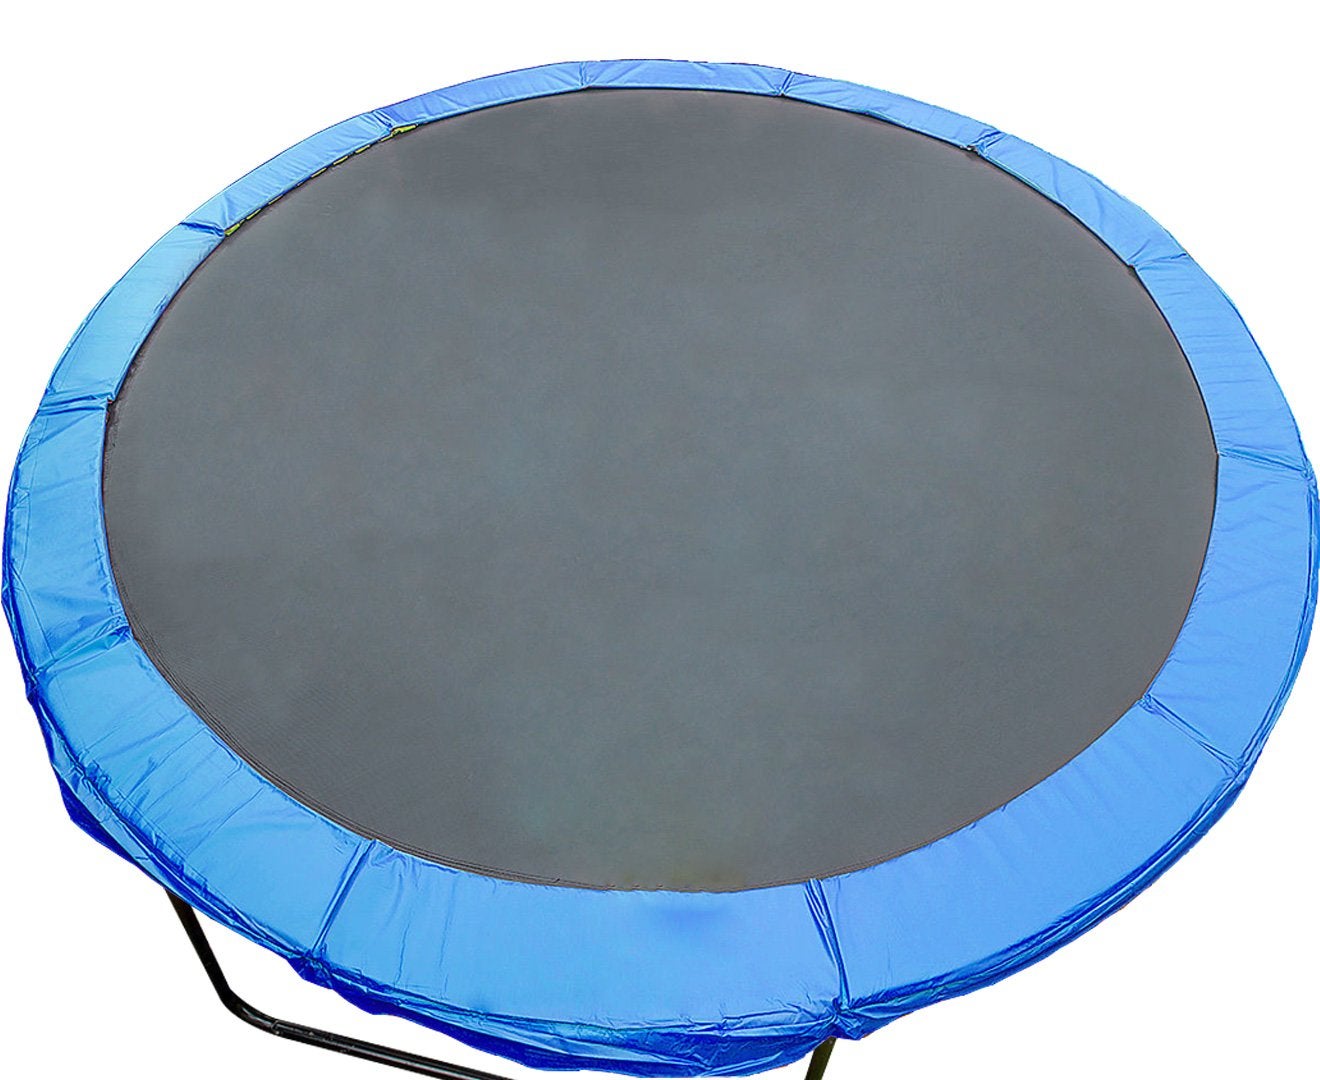 New 10ft Replacement Reinforced Outdoor Round Trampoline Safety Spring Pad Cover